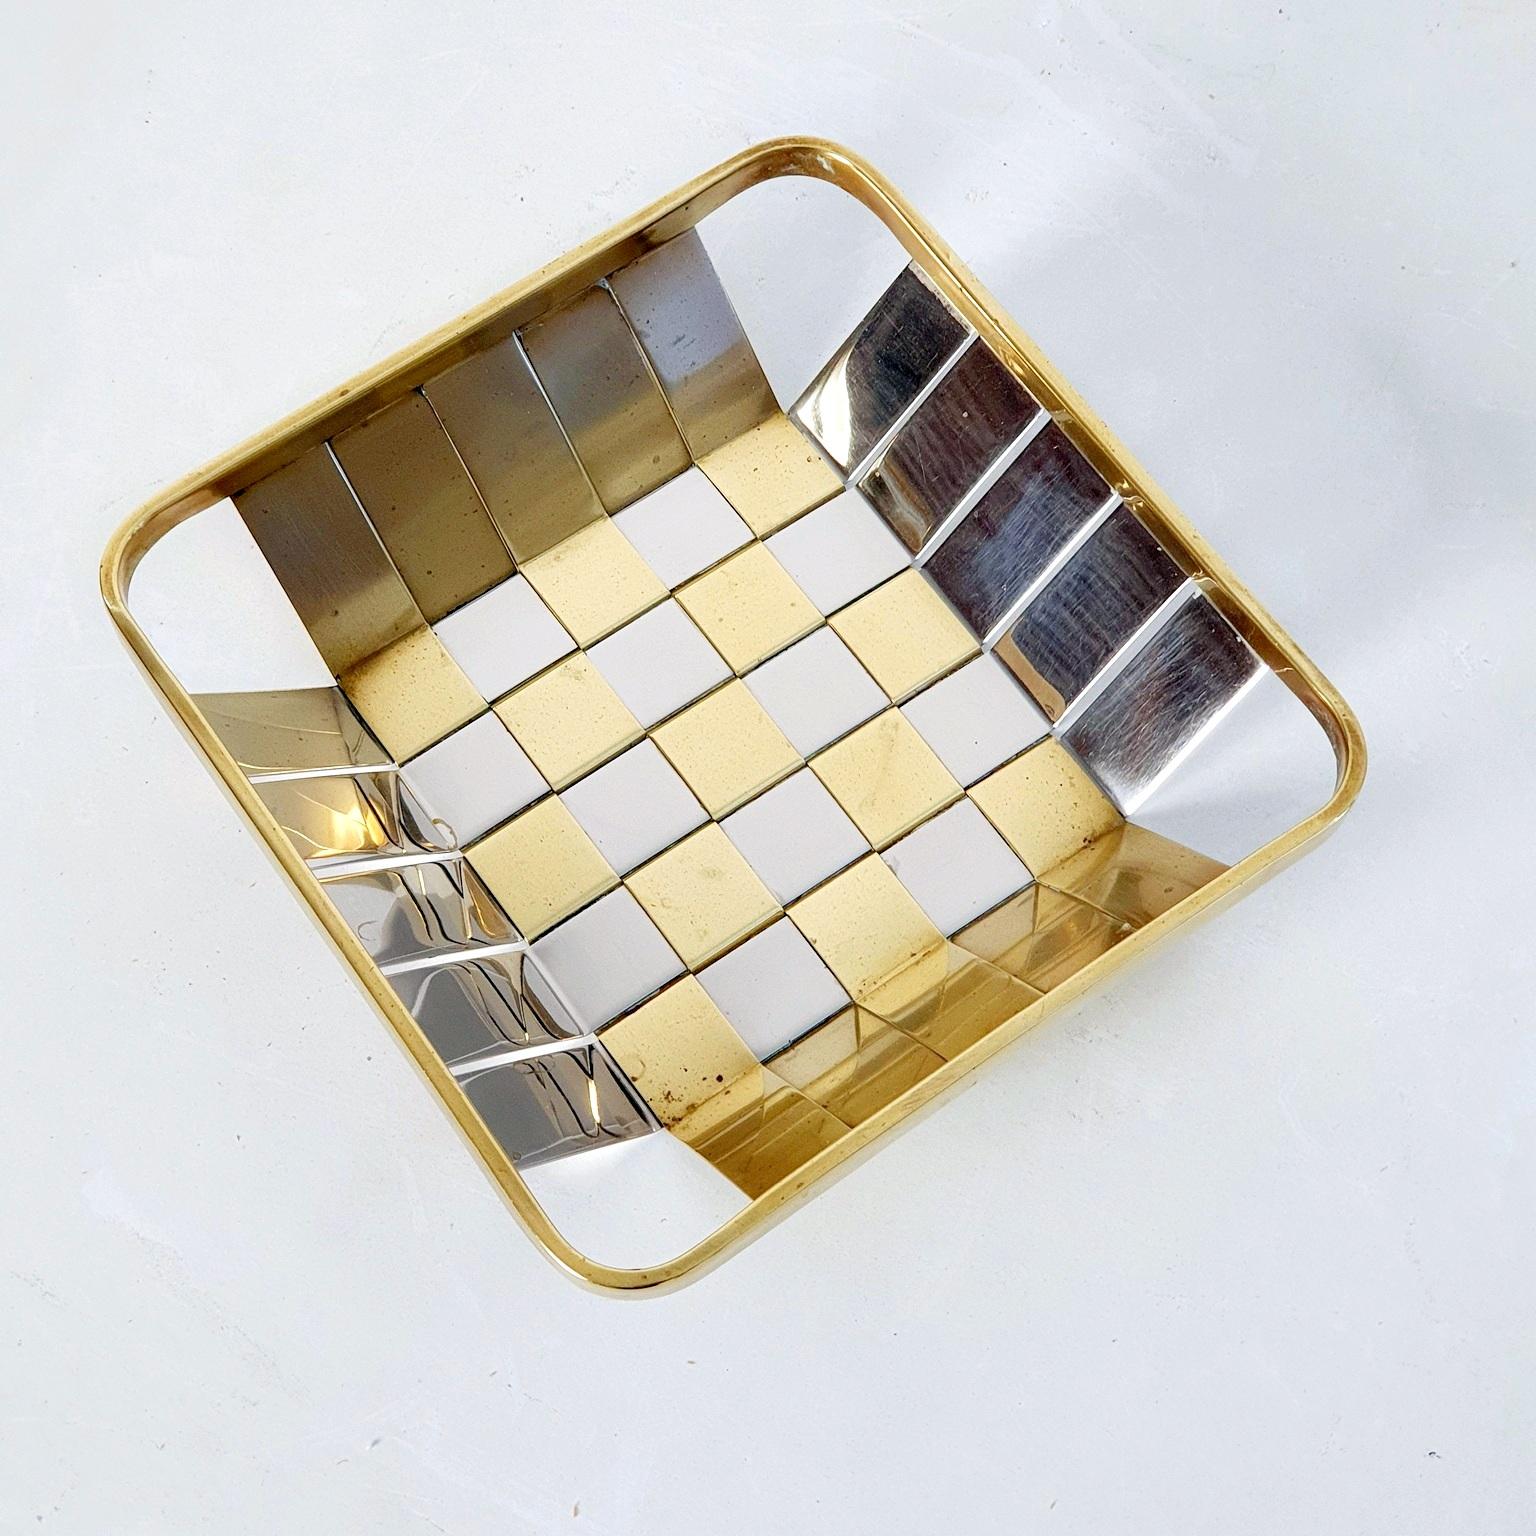 An Italian square basket in silver and gold metal made with weaving technique. This piece is typical for the style of the era evoking the designs of Willy Rizzo and Rome Rega for instance. Works great as a fruit or bread basket.